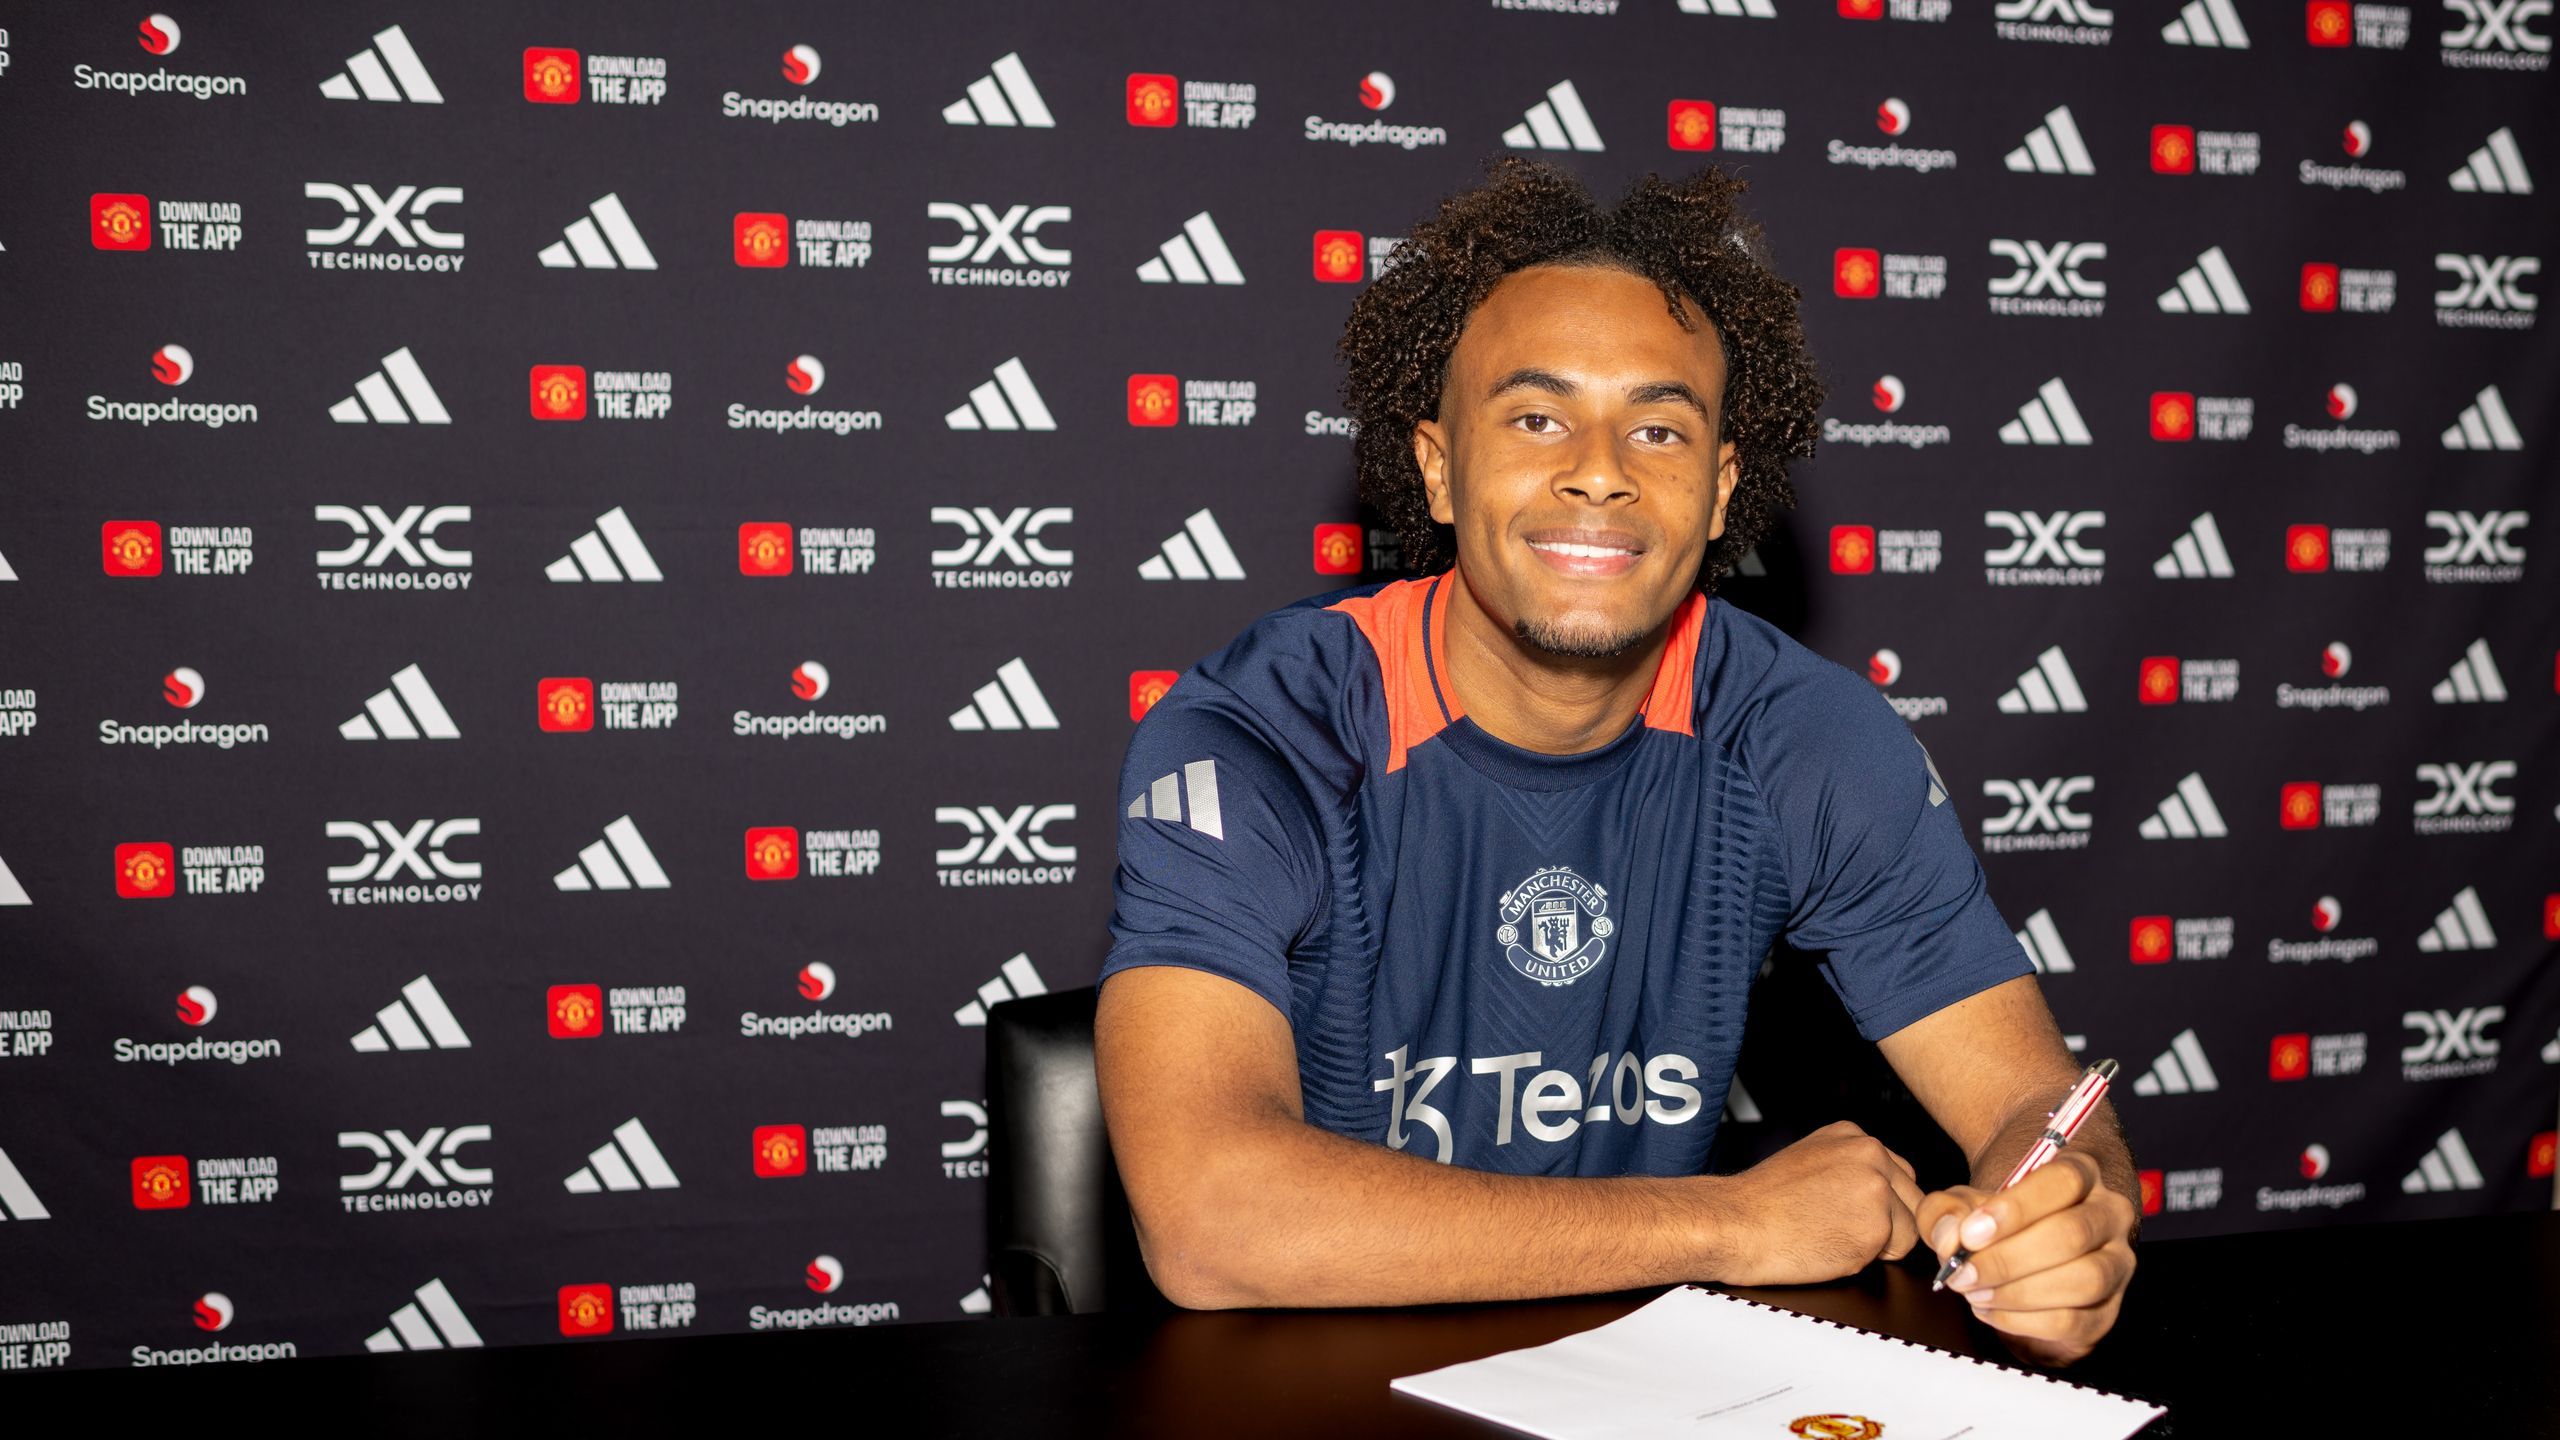 Joshua Zirkzee: Dutchman ‘excited’ to join ‘best club in the world’, Manchester United